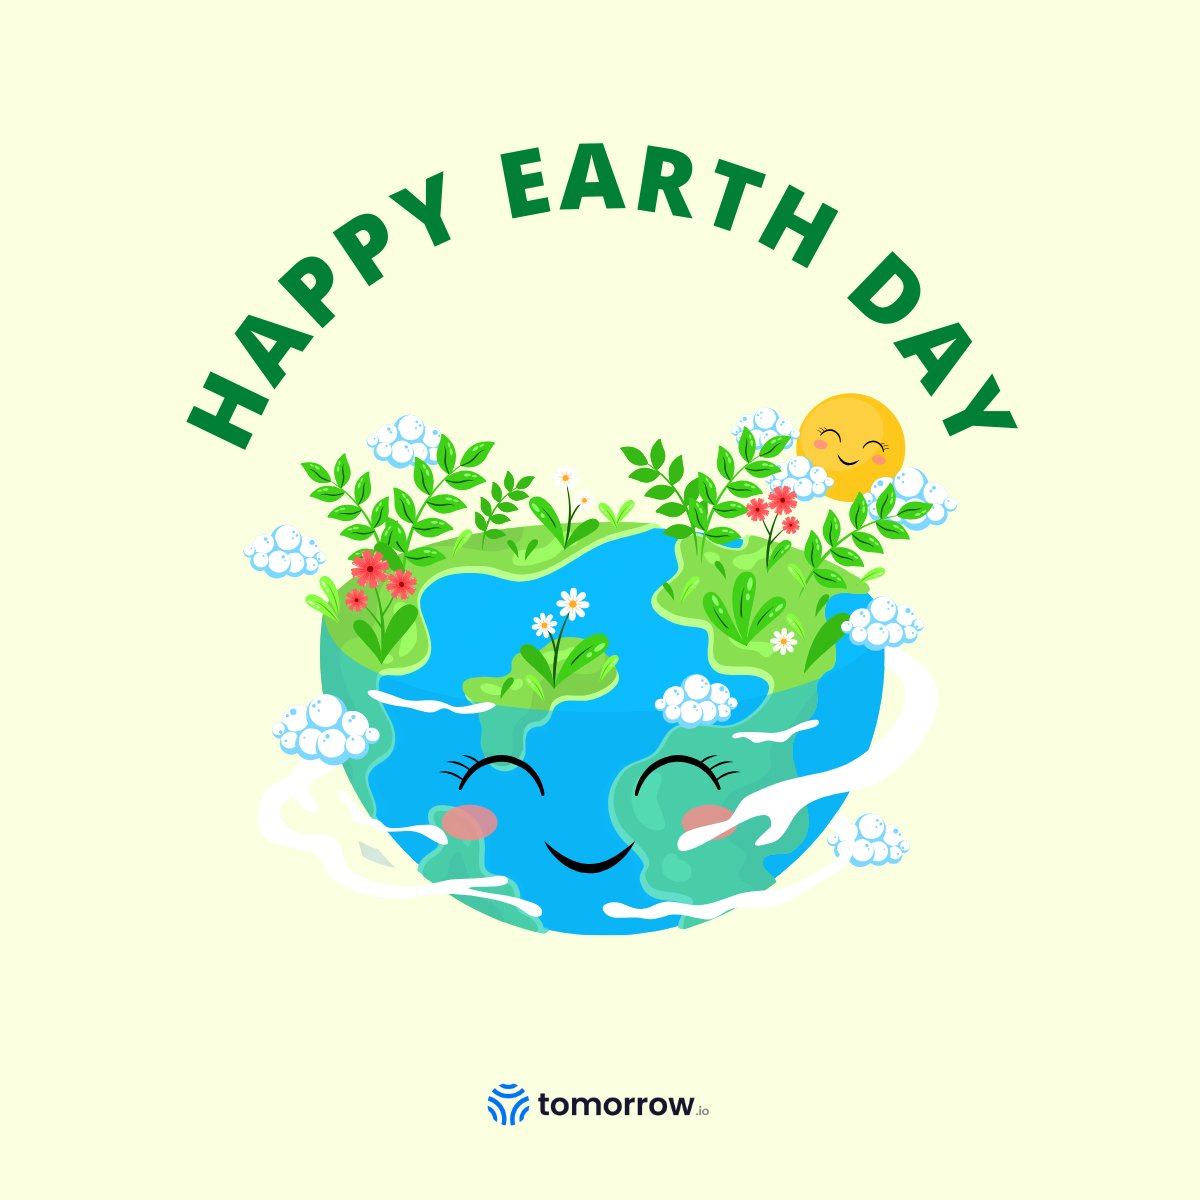 🌍 Happy Earth Day! 🌎 Today, we celebrate our beautiful planet and our commitment to protecting its natural wonders. The weather plays a big role, with @tomorrowio_ teams can become resilient in the face of an increasingly volatile climate. #EarthDay